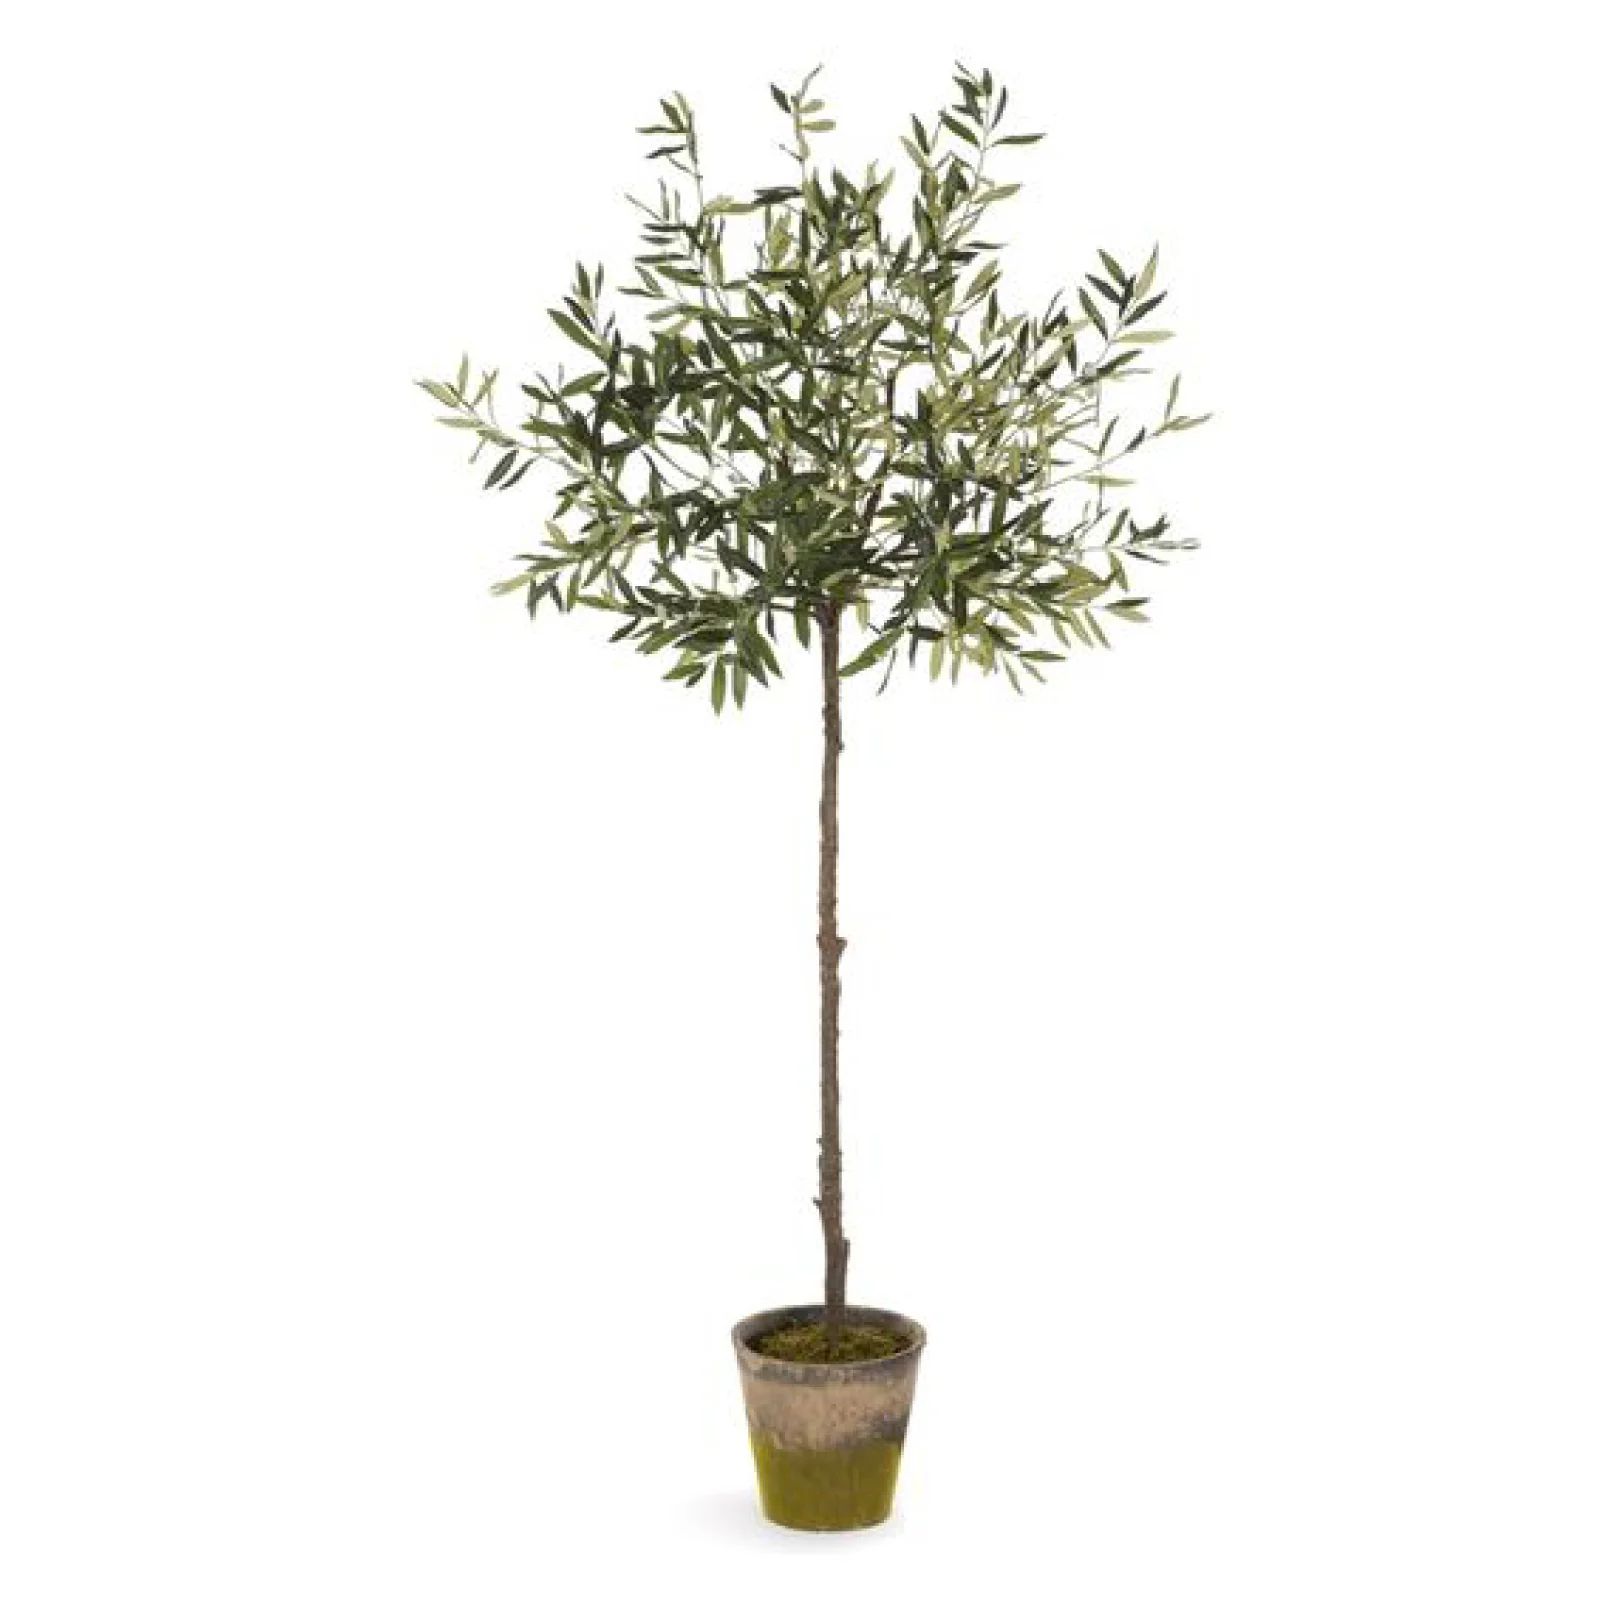 Potted Olive Tree | Brooke and Lou